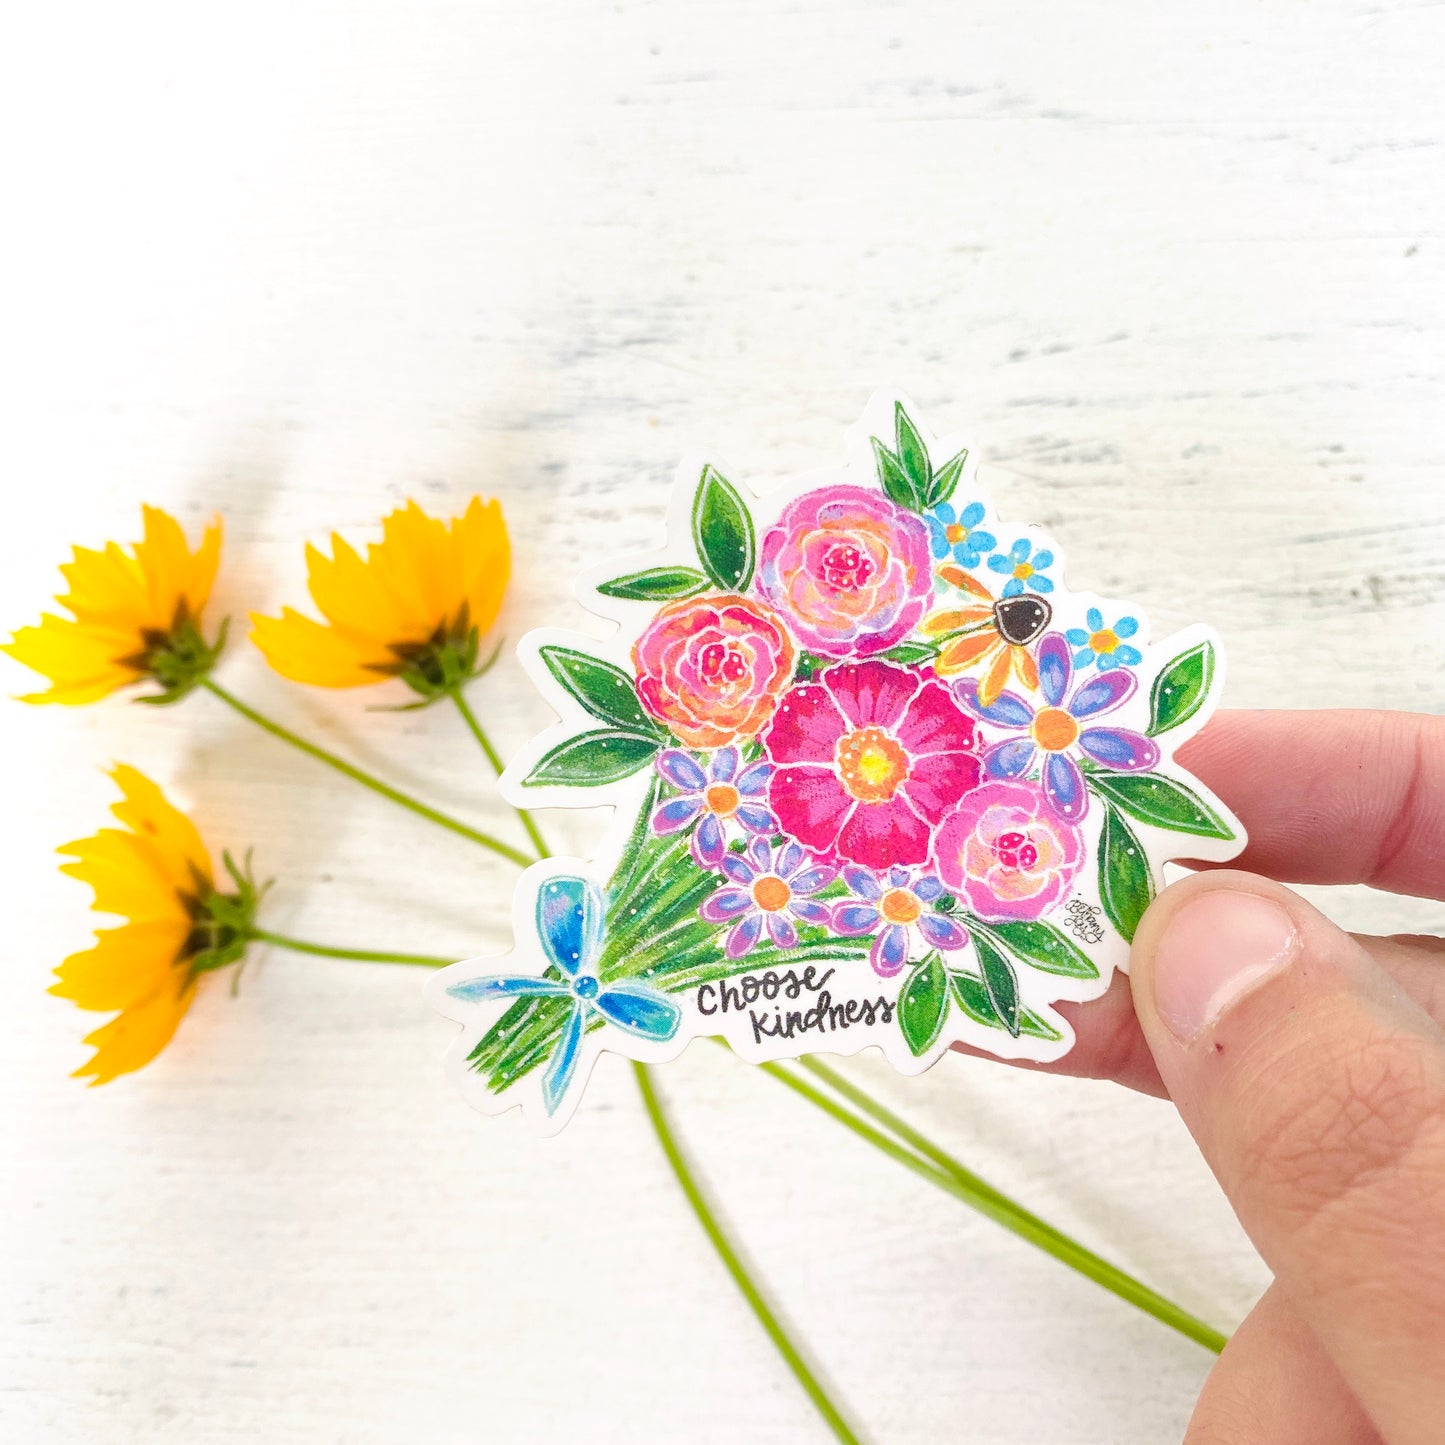 Choose Kindness Bouquet- May Sticker of the Month